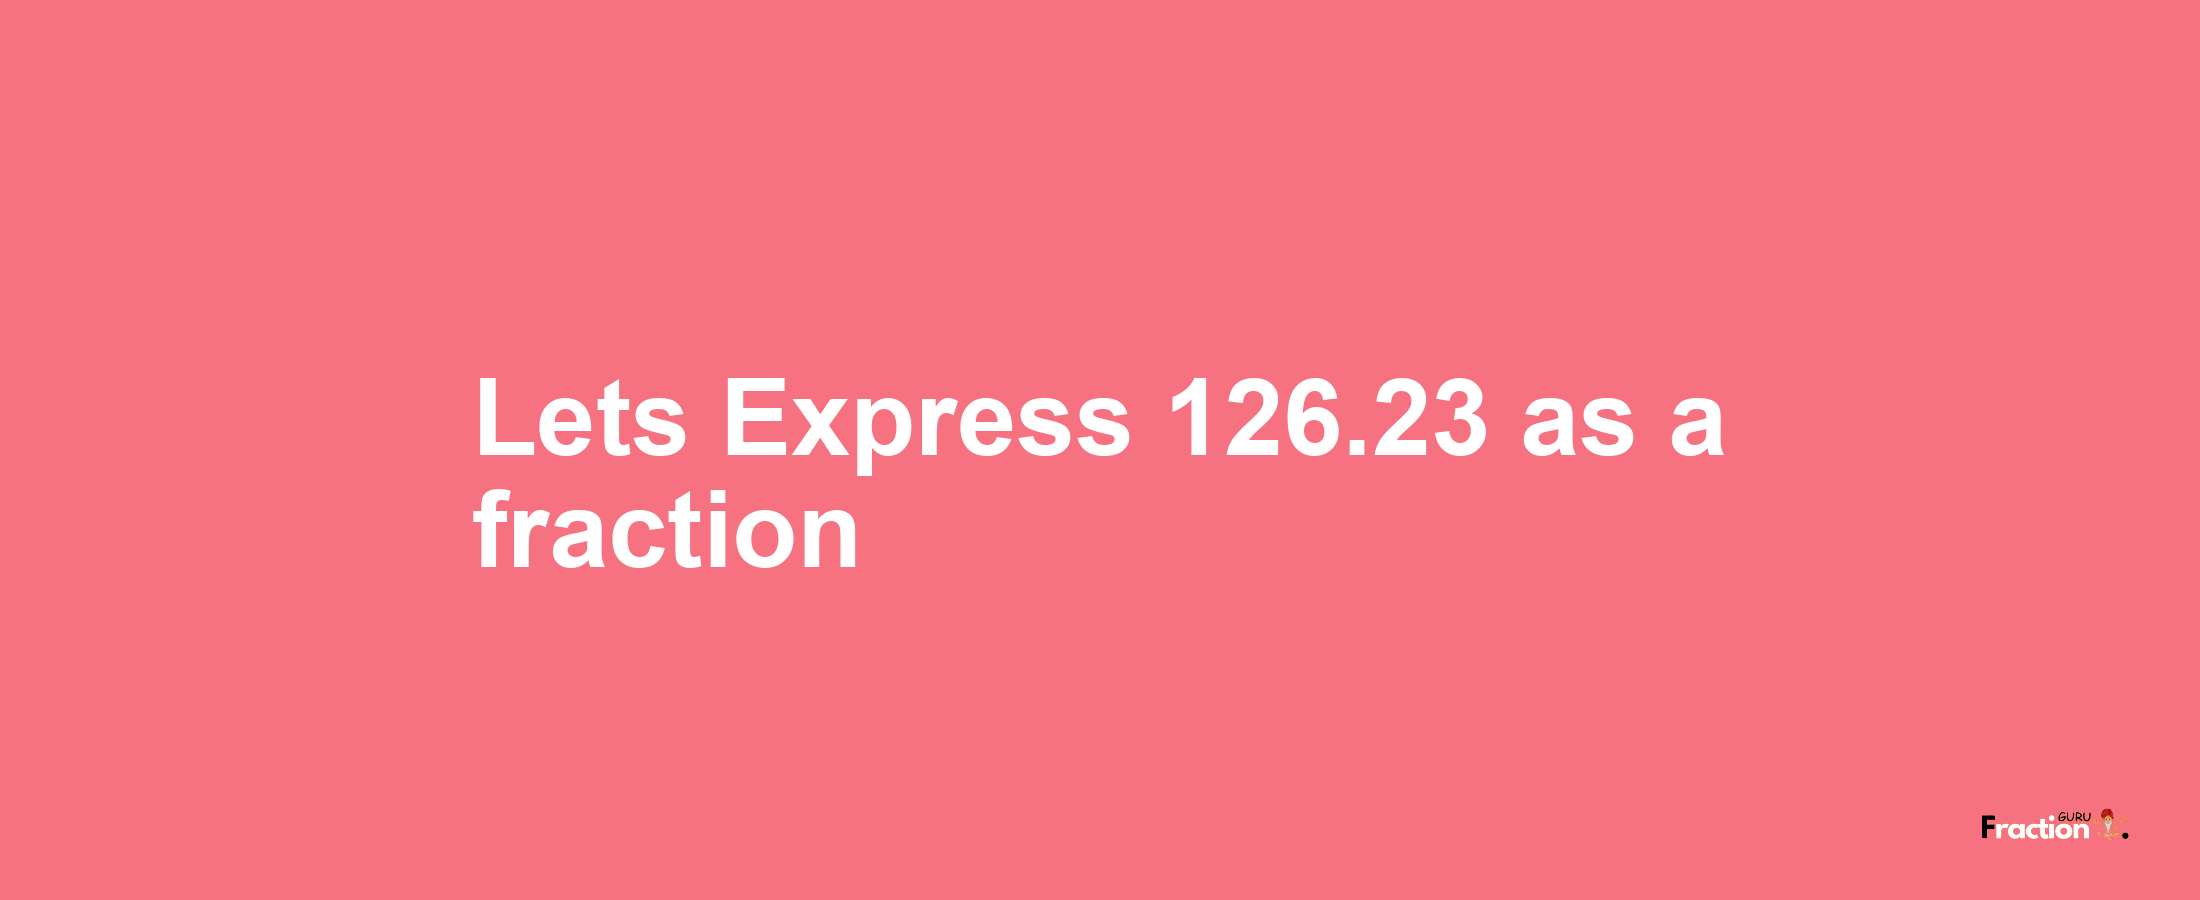 Lets Express 126.23 as afraction